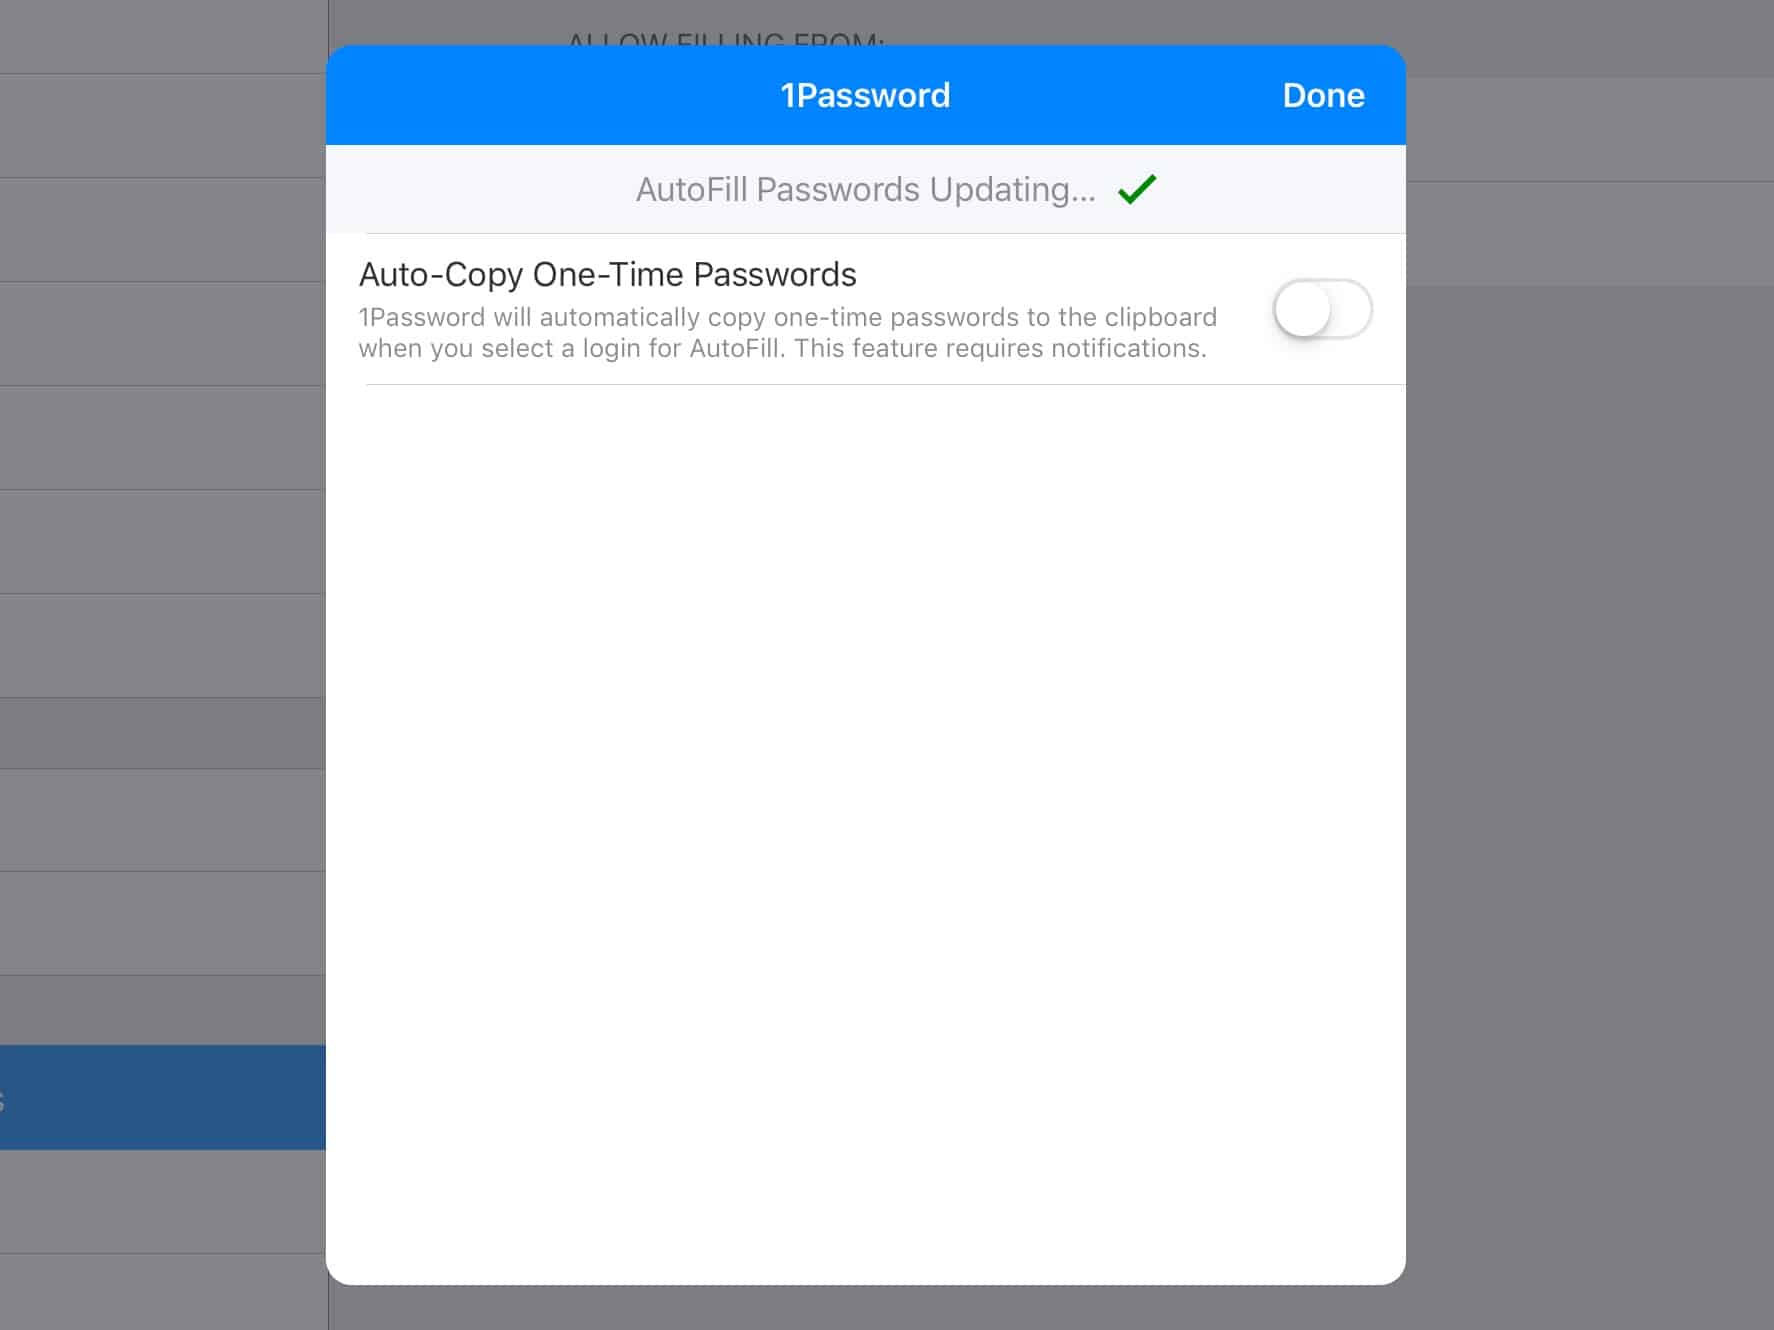 Some apps auto-copy the two-factor password.